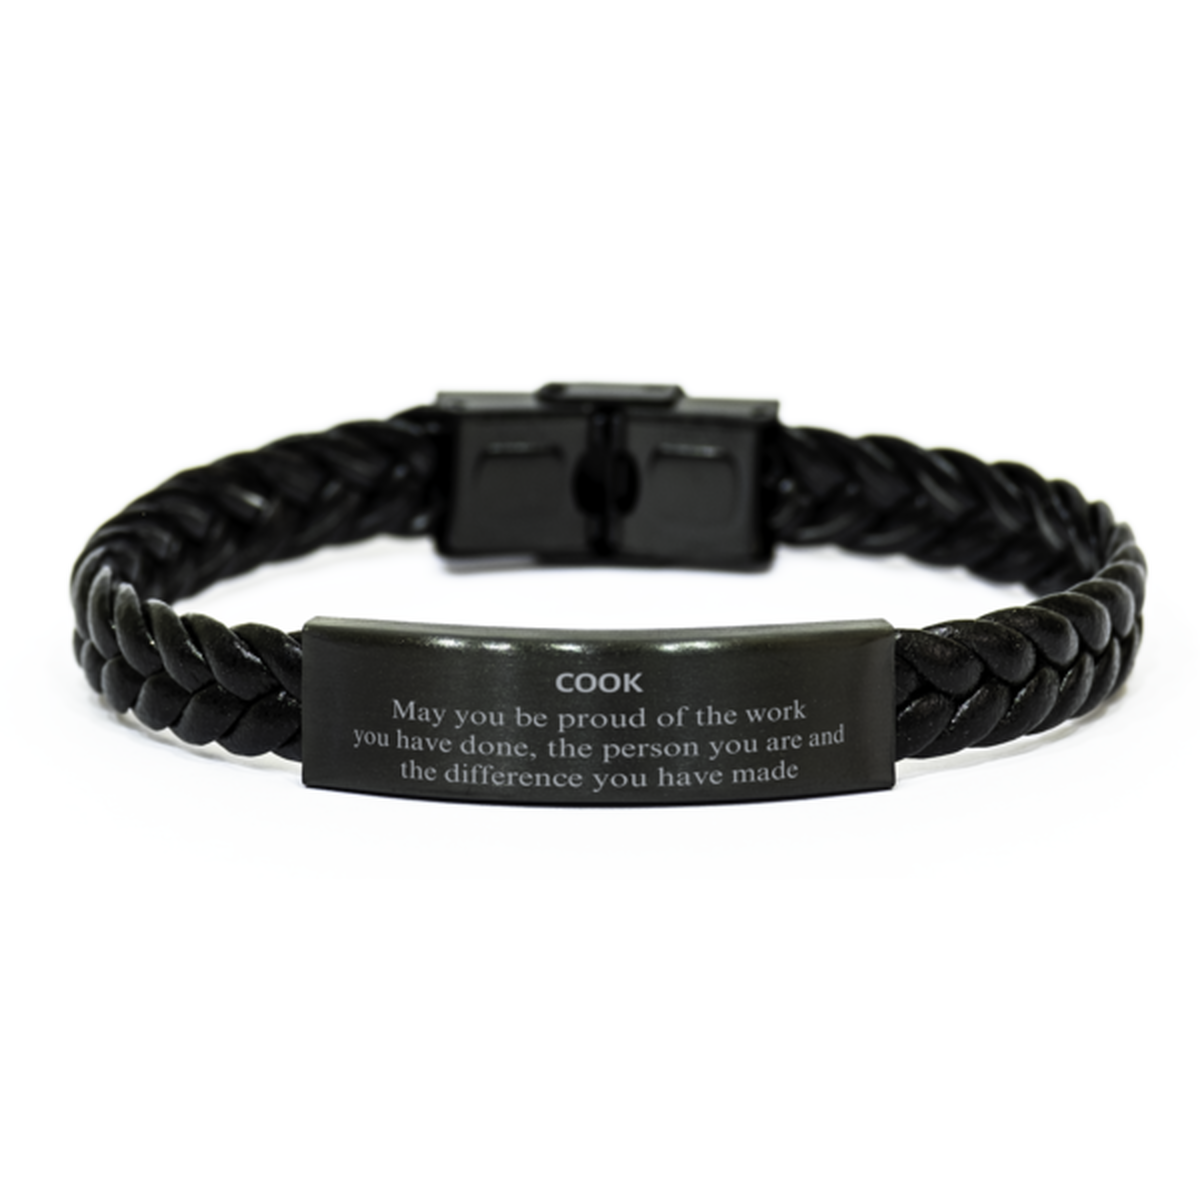 Cook May you be proud of the work you have done, Retirement Cook Braided Leather Bracelet for Colleague Appreciation Gifts Amazing for Cook